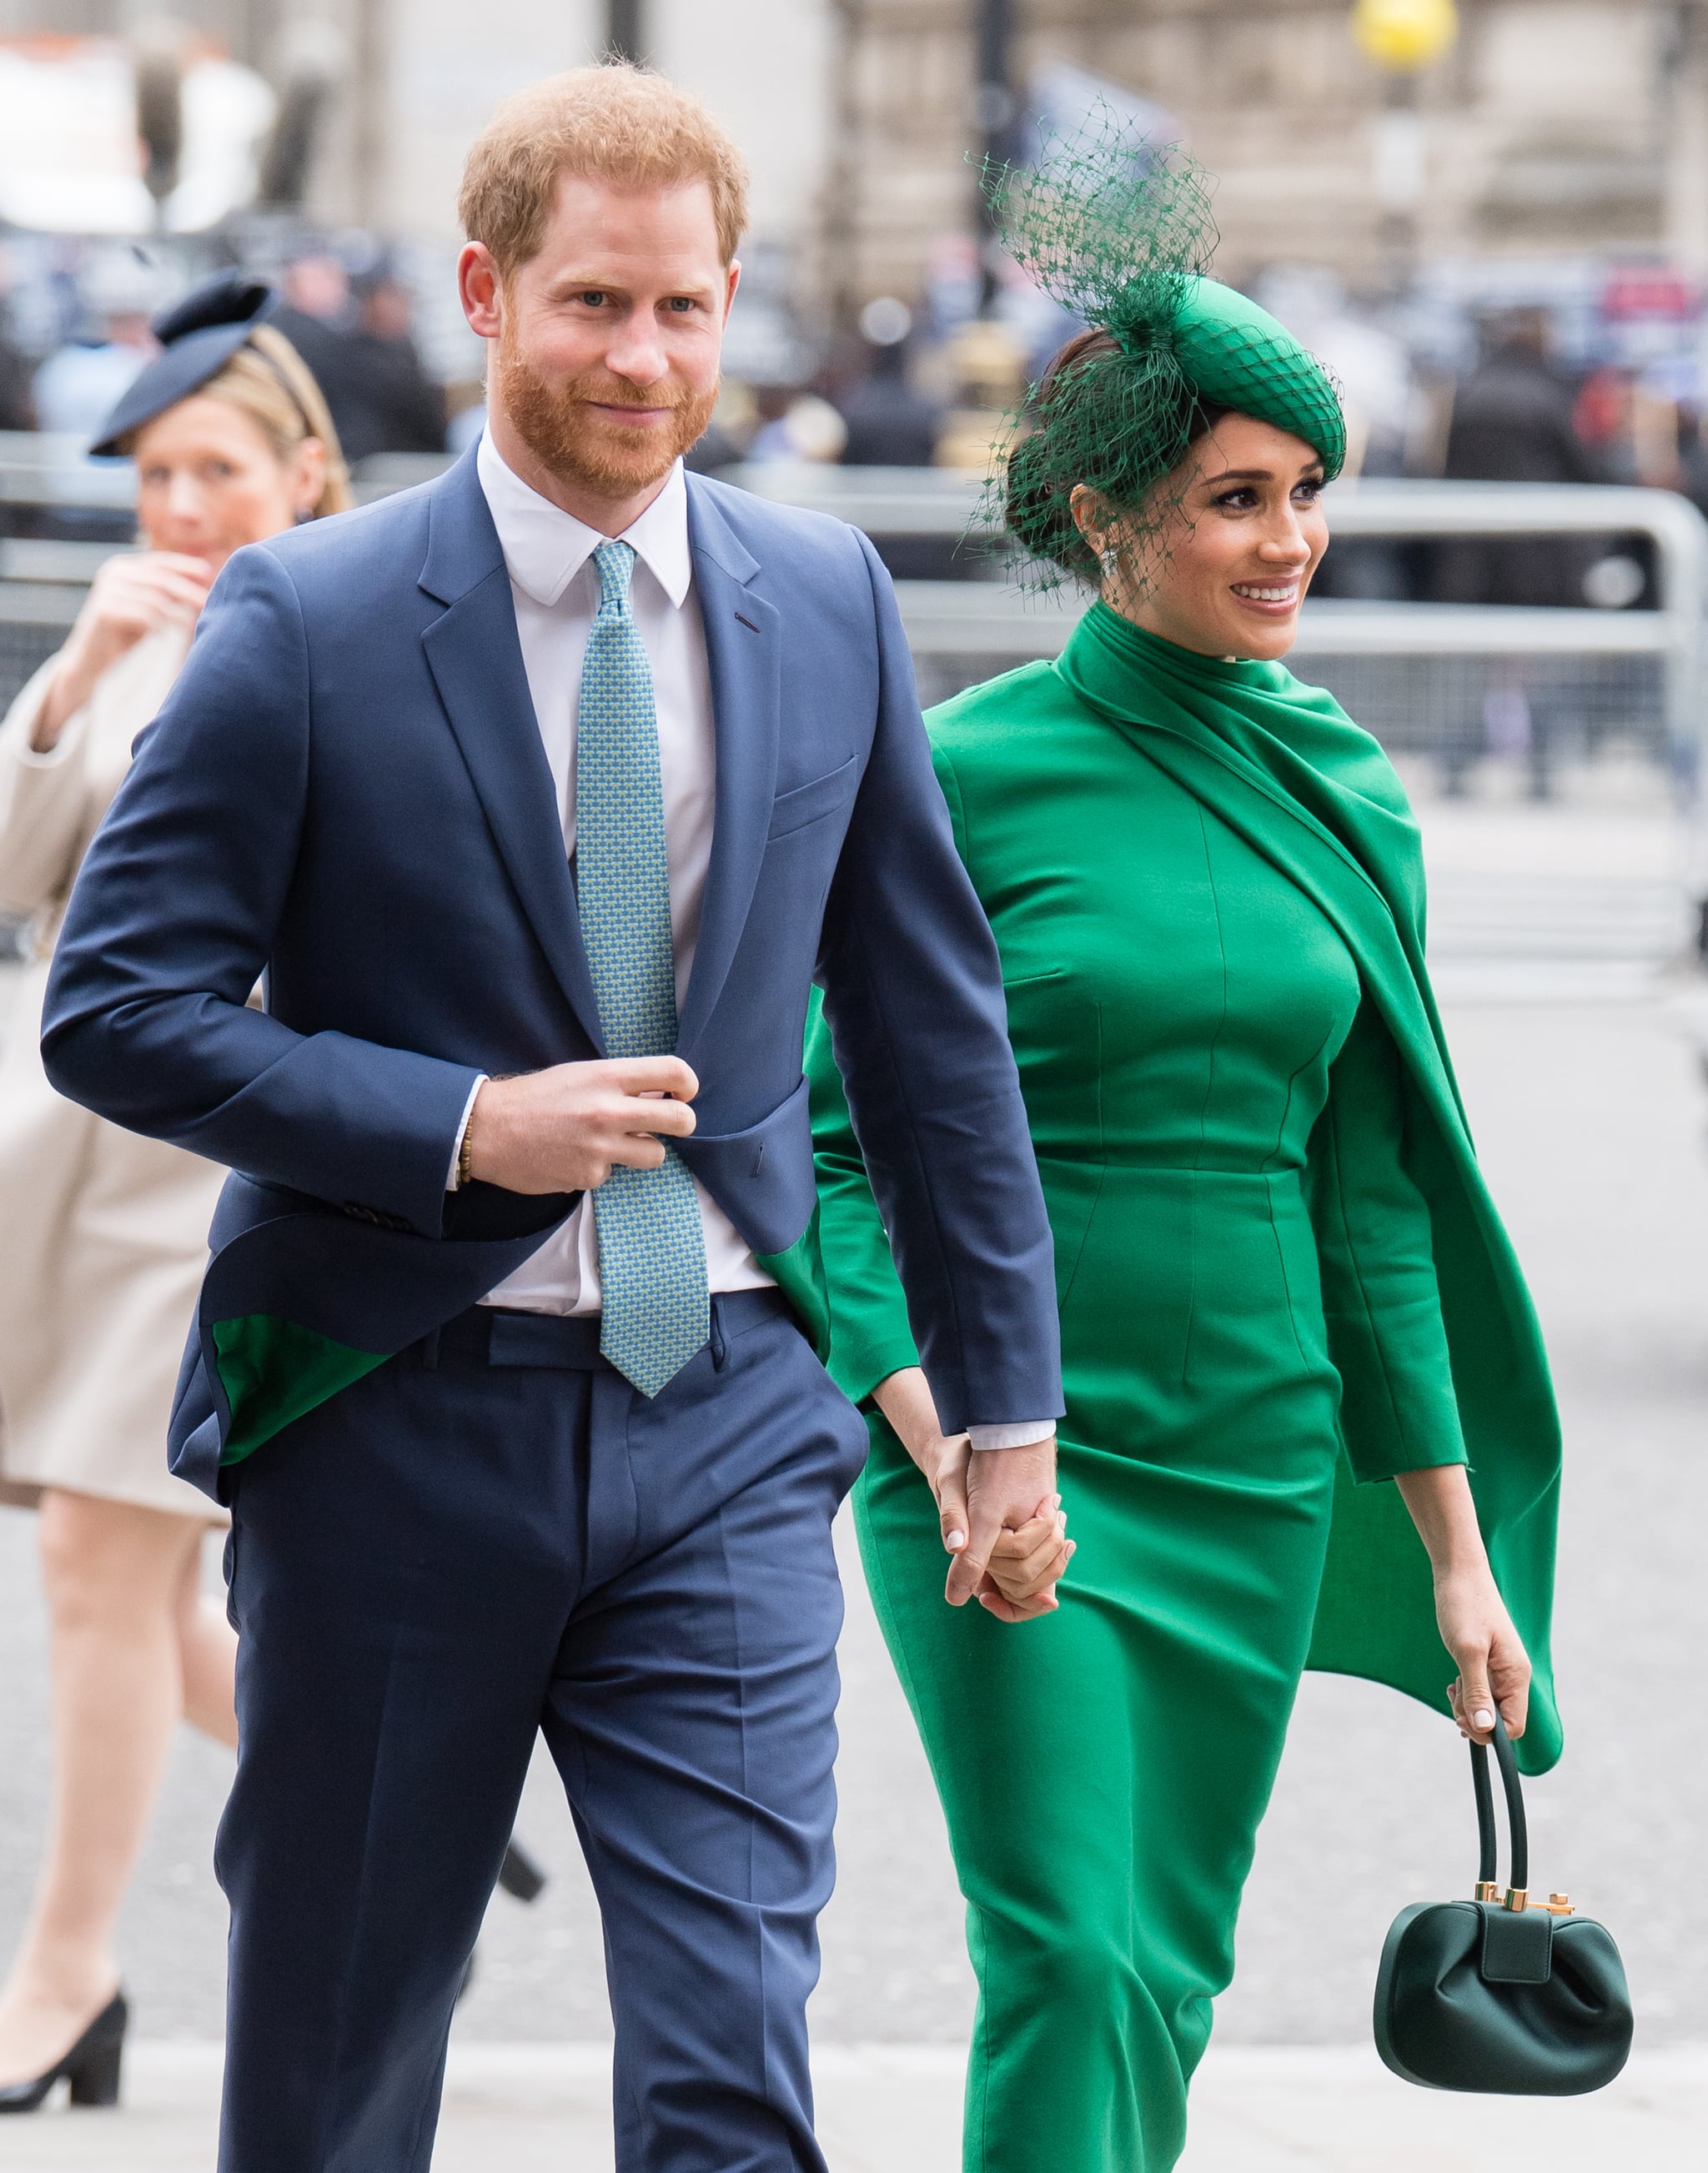 LONDON, ENGLAND - MARCH 9: Prince Harry, Duke of Sussex and Meghan, Duchess of Sussex attend the 2020 Commonwealth Day Service on March 9, 2020 in London, England.  (Photo by Samir Hussein/WireImage)